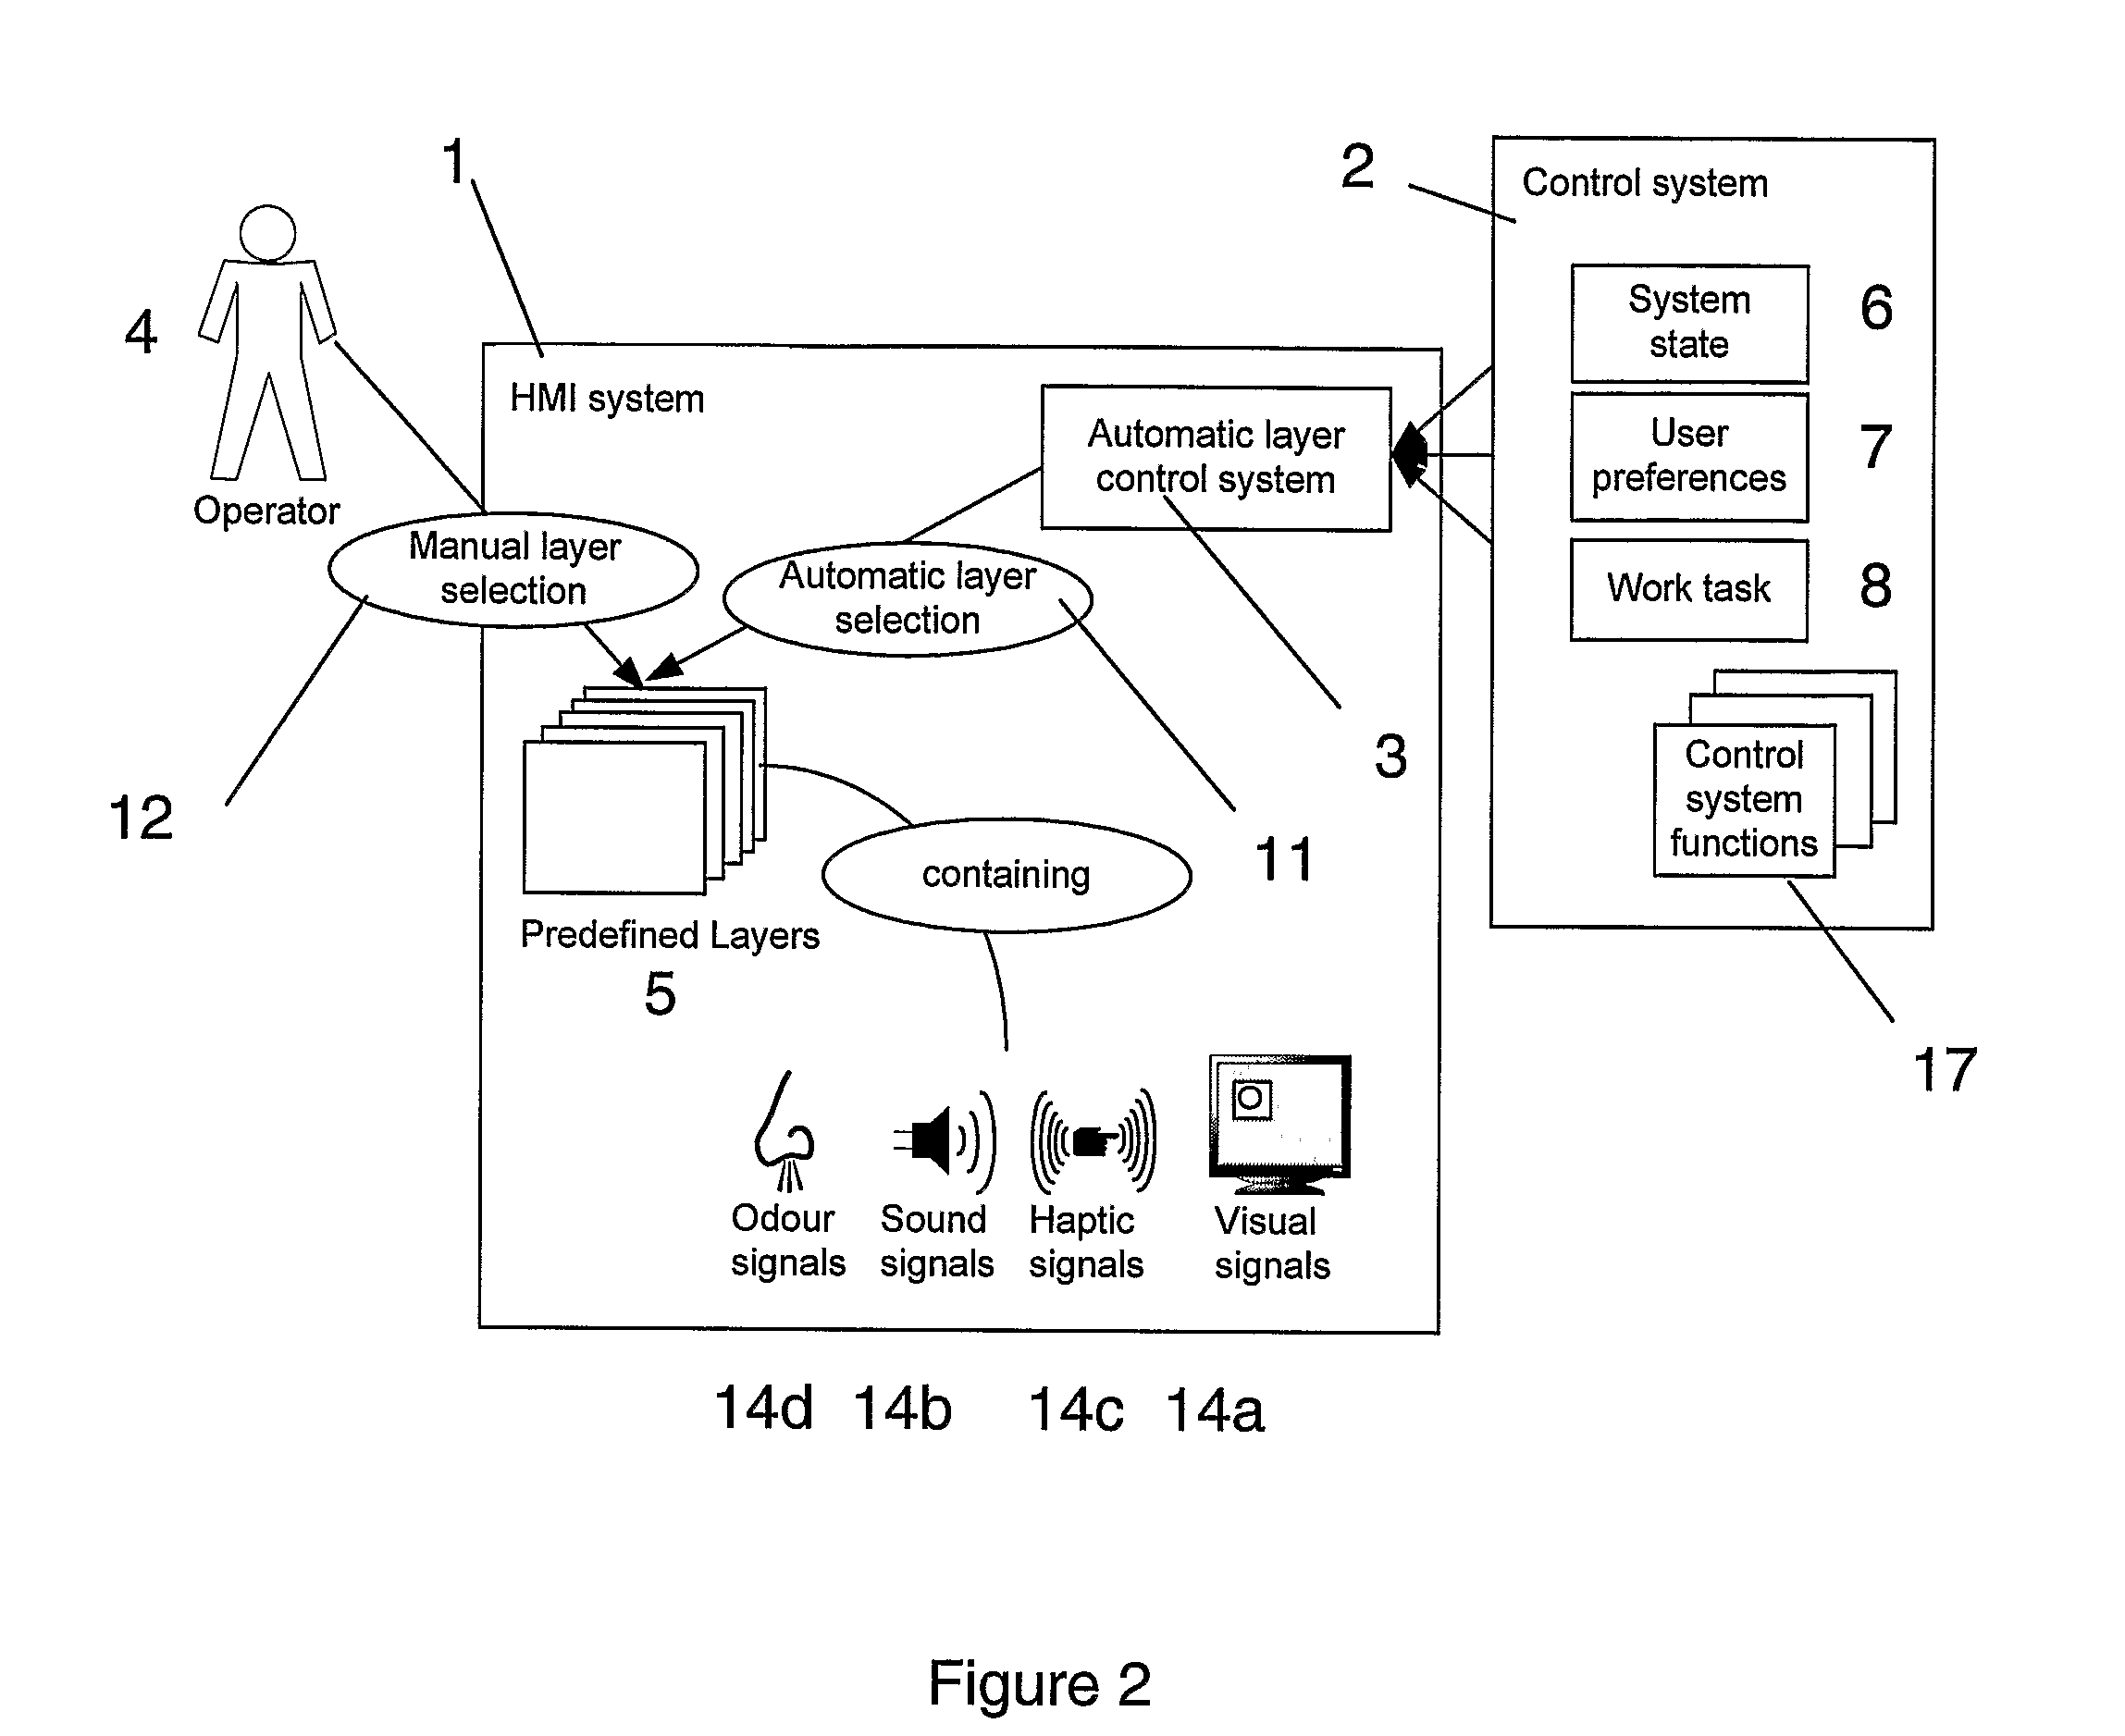 Method and System for Providing a User Interface